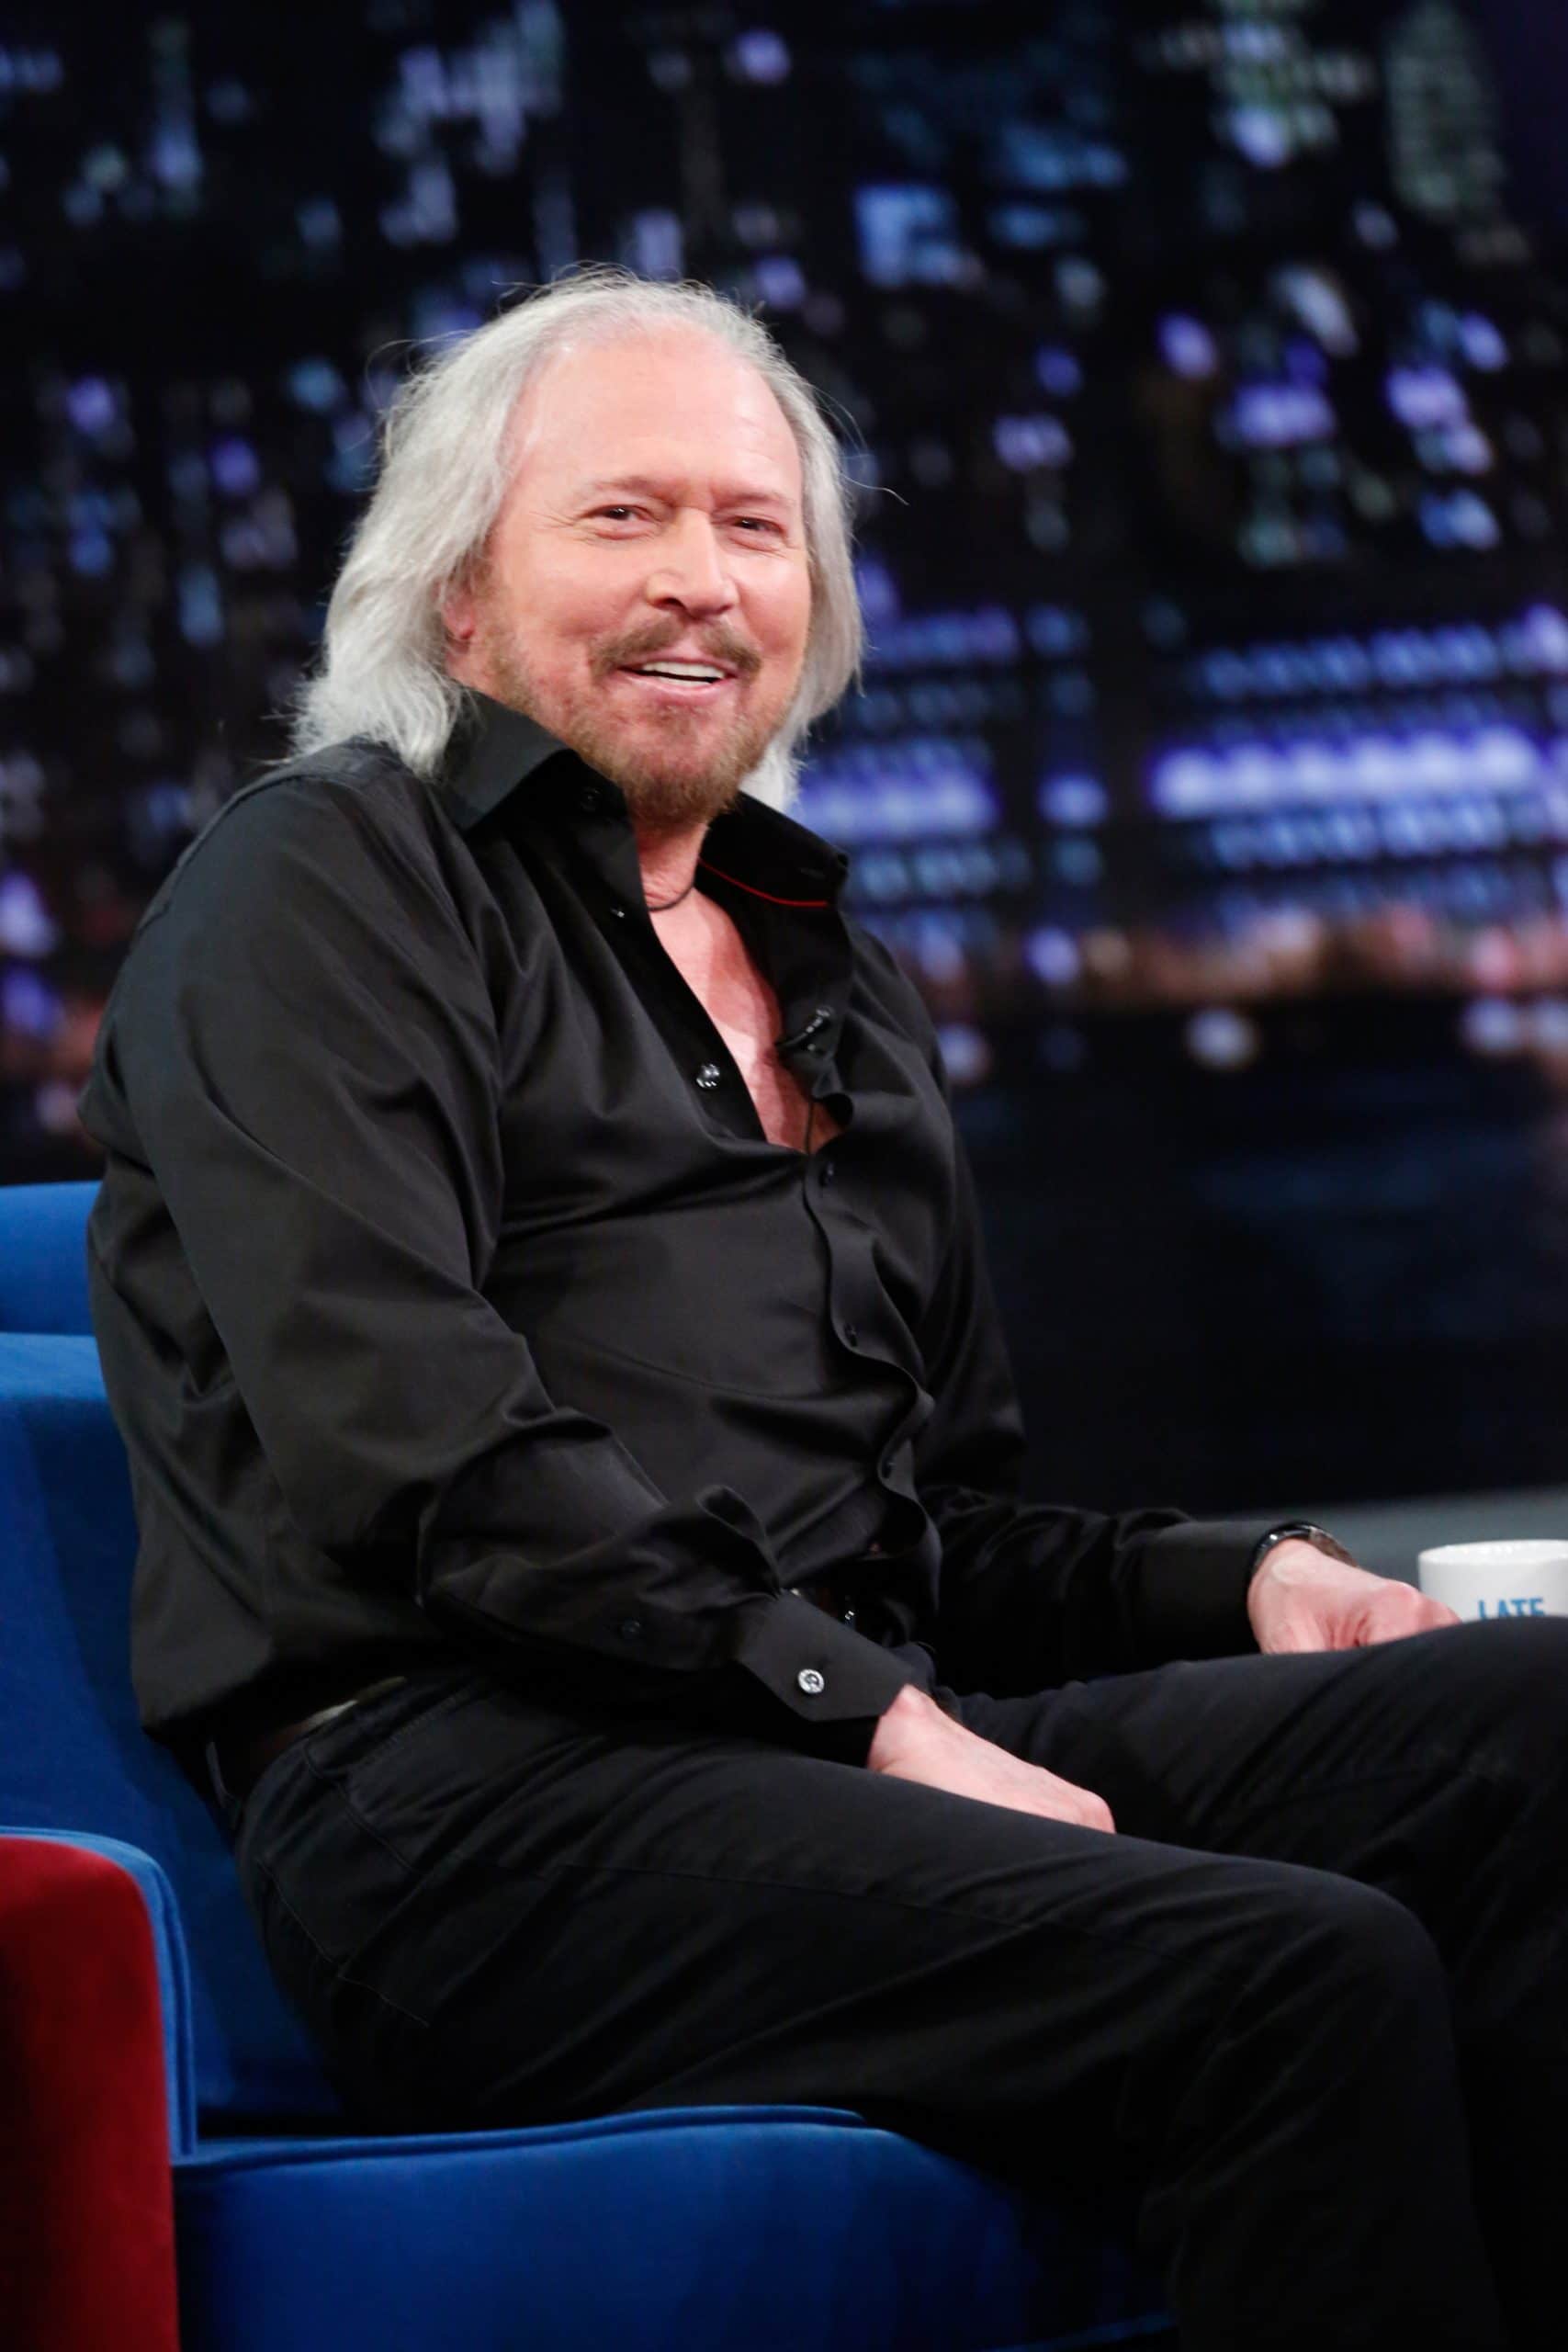 LATE NIGHT WITH JIMMY FALLON, Barry Gibb